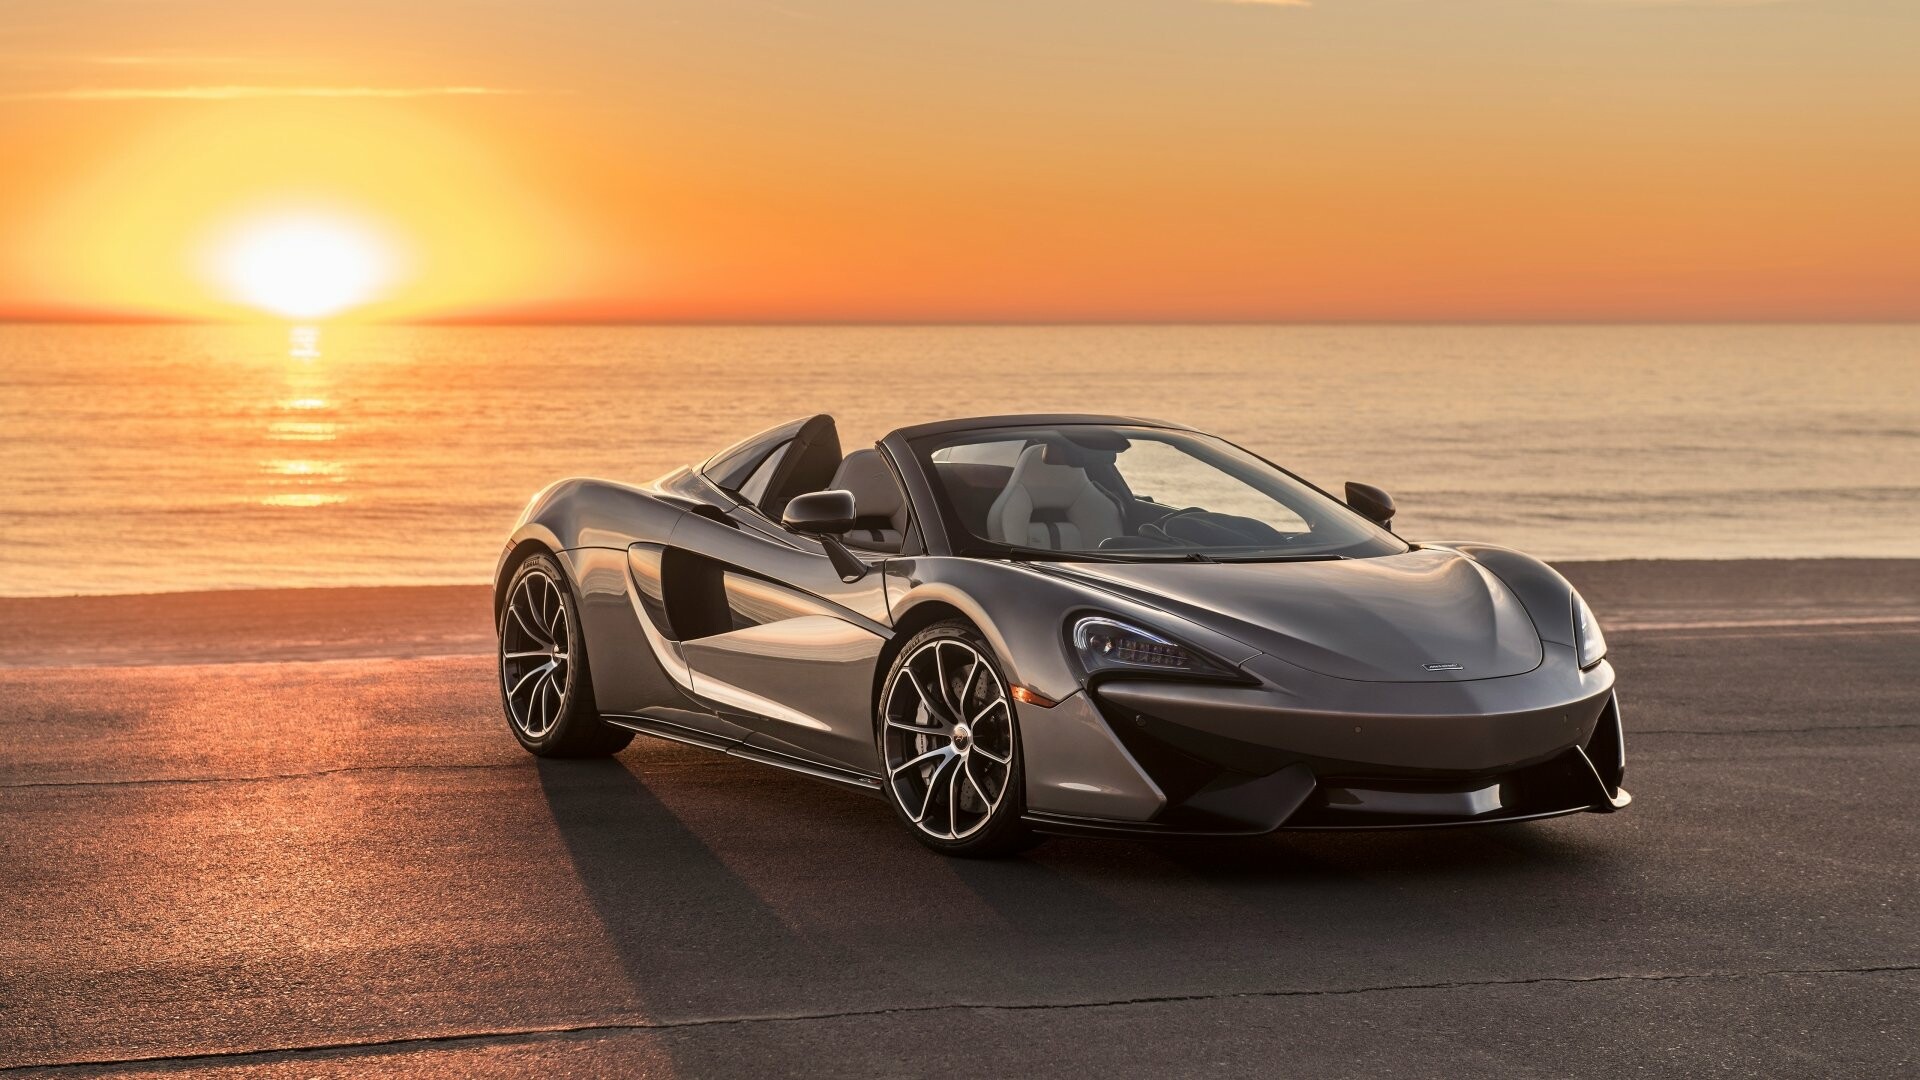 McLaren: A sports car 570S, Unveiled at the 2015 New York International Auto Show. 1920x1080 Full HD Background.